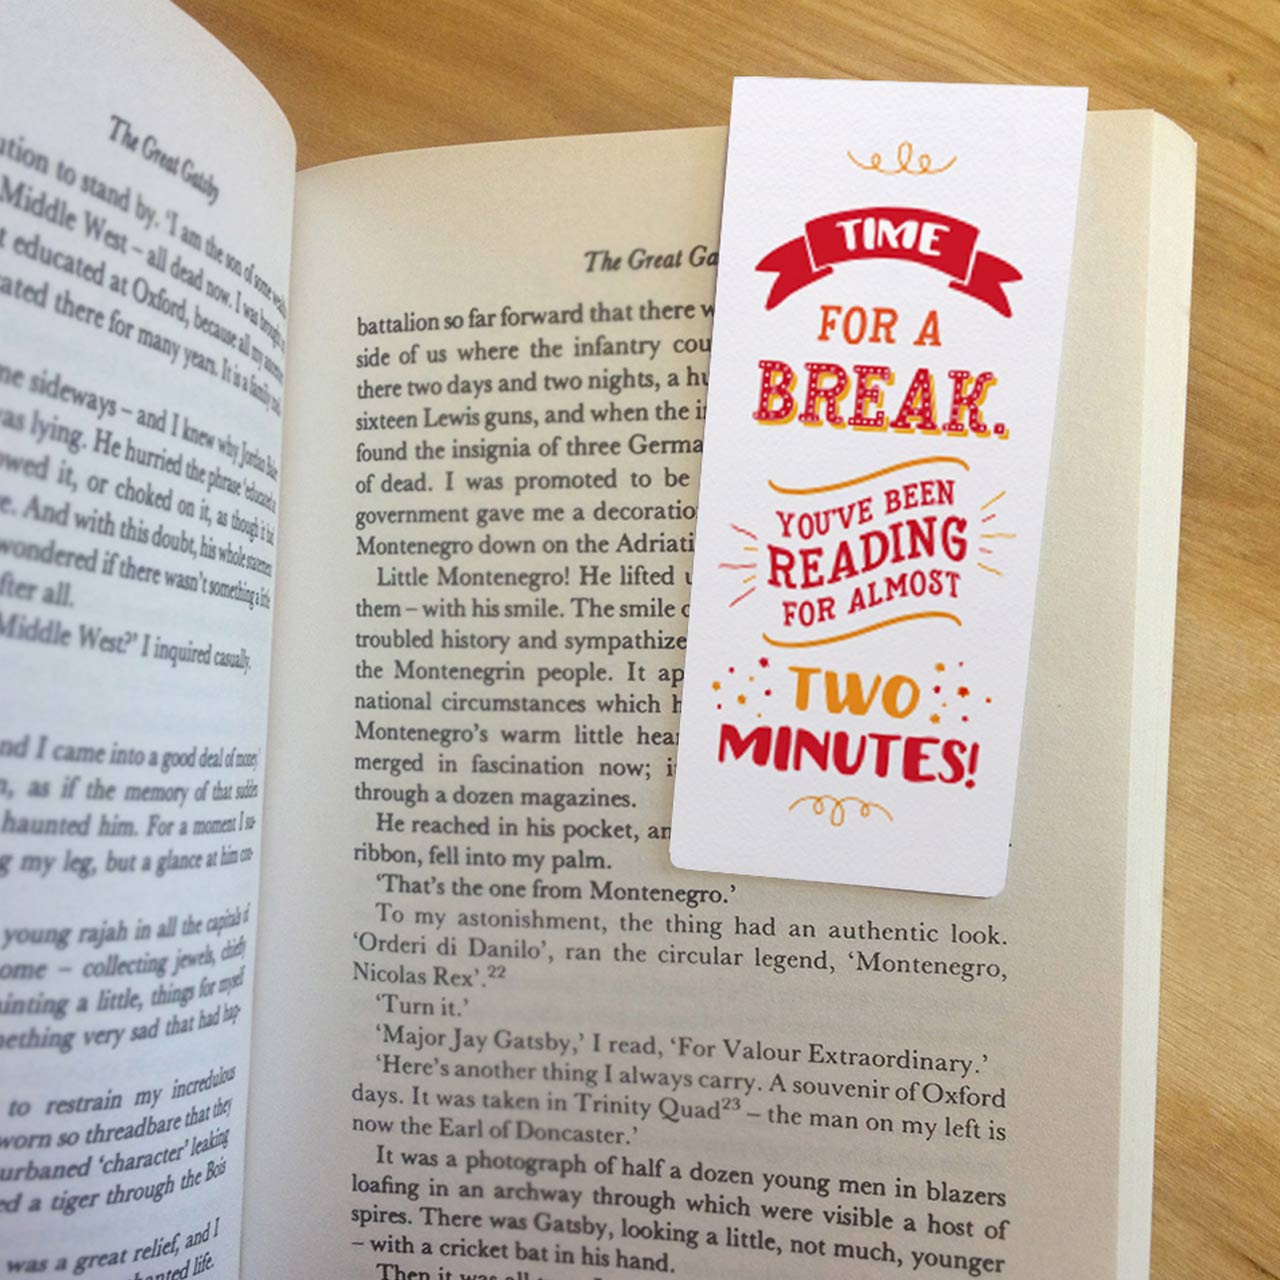 Time for a Break Magnetic Bookmark